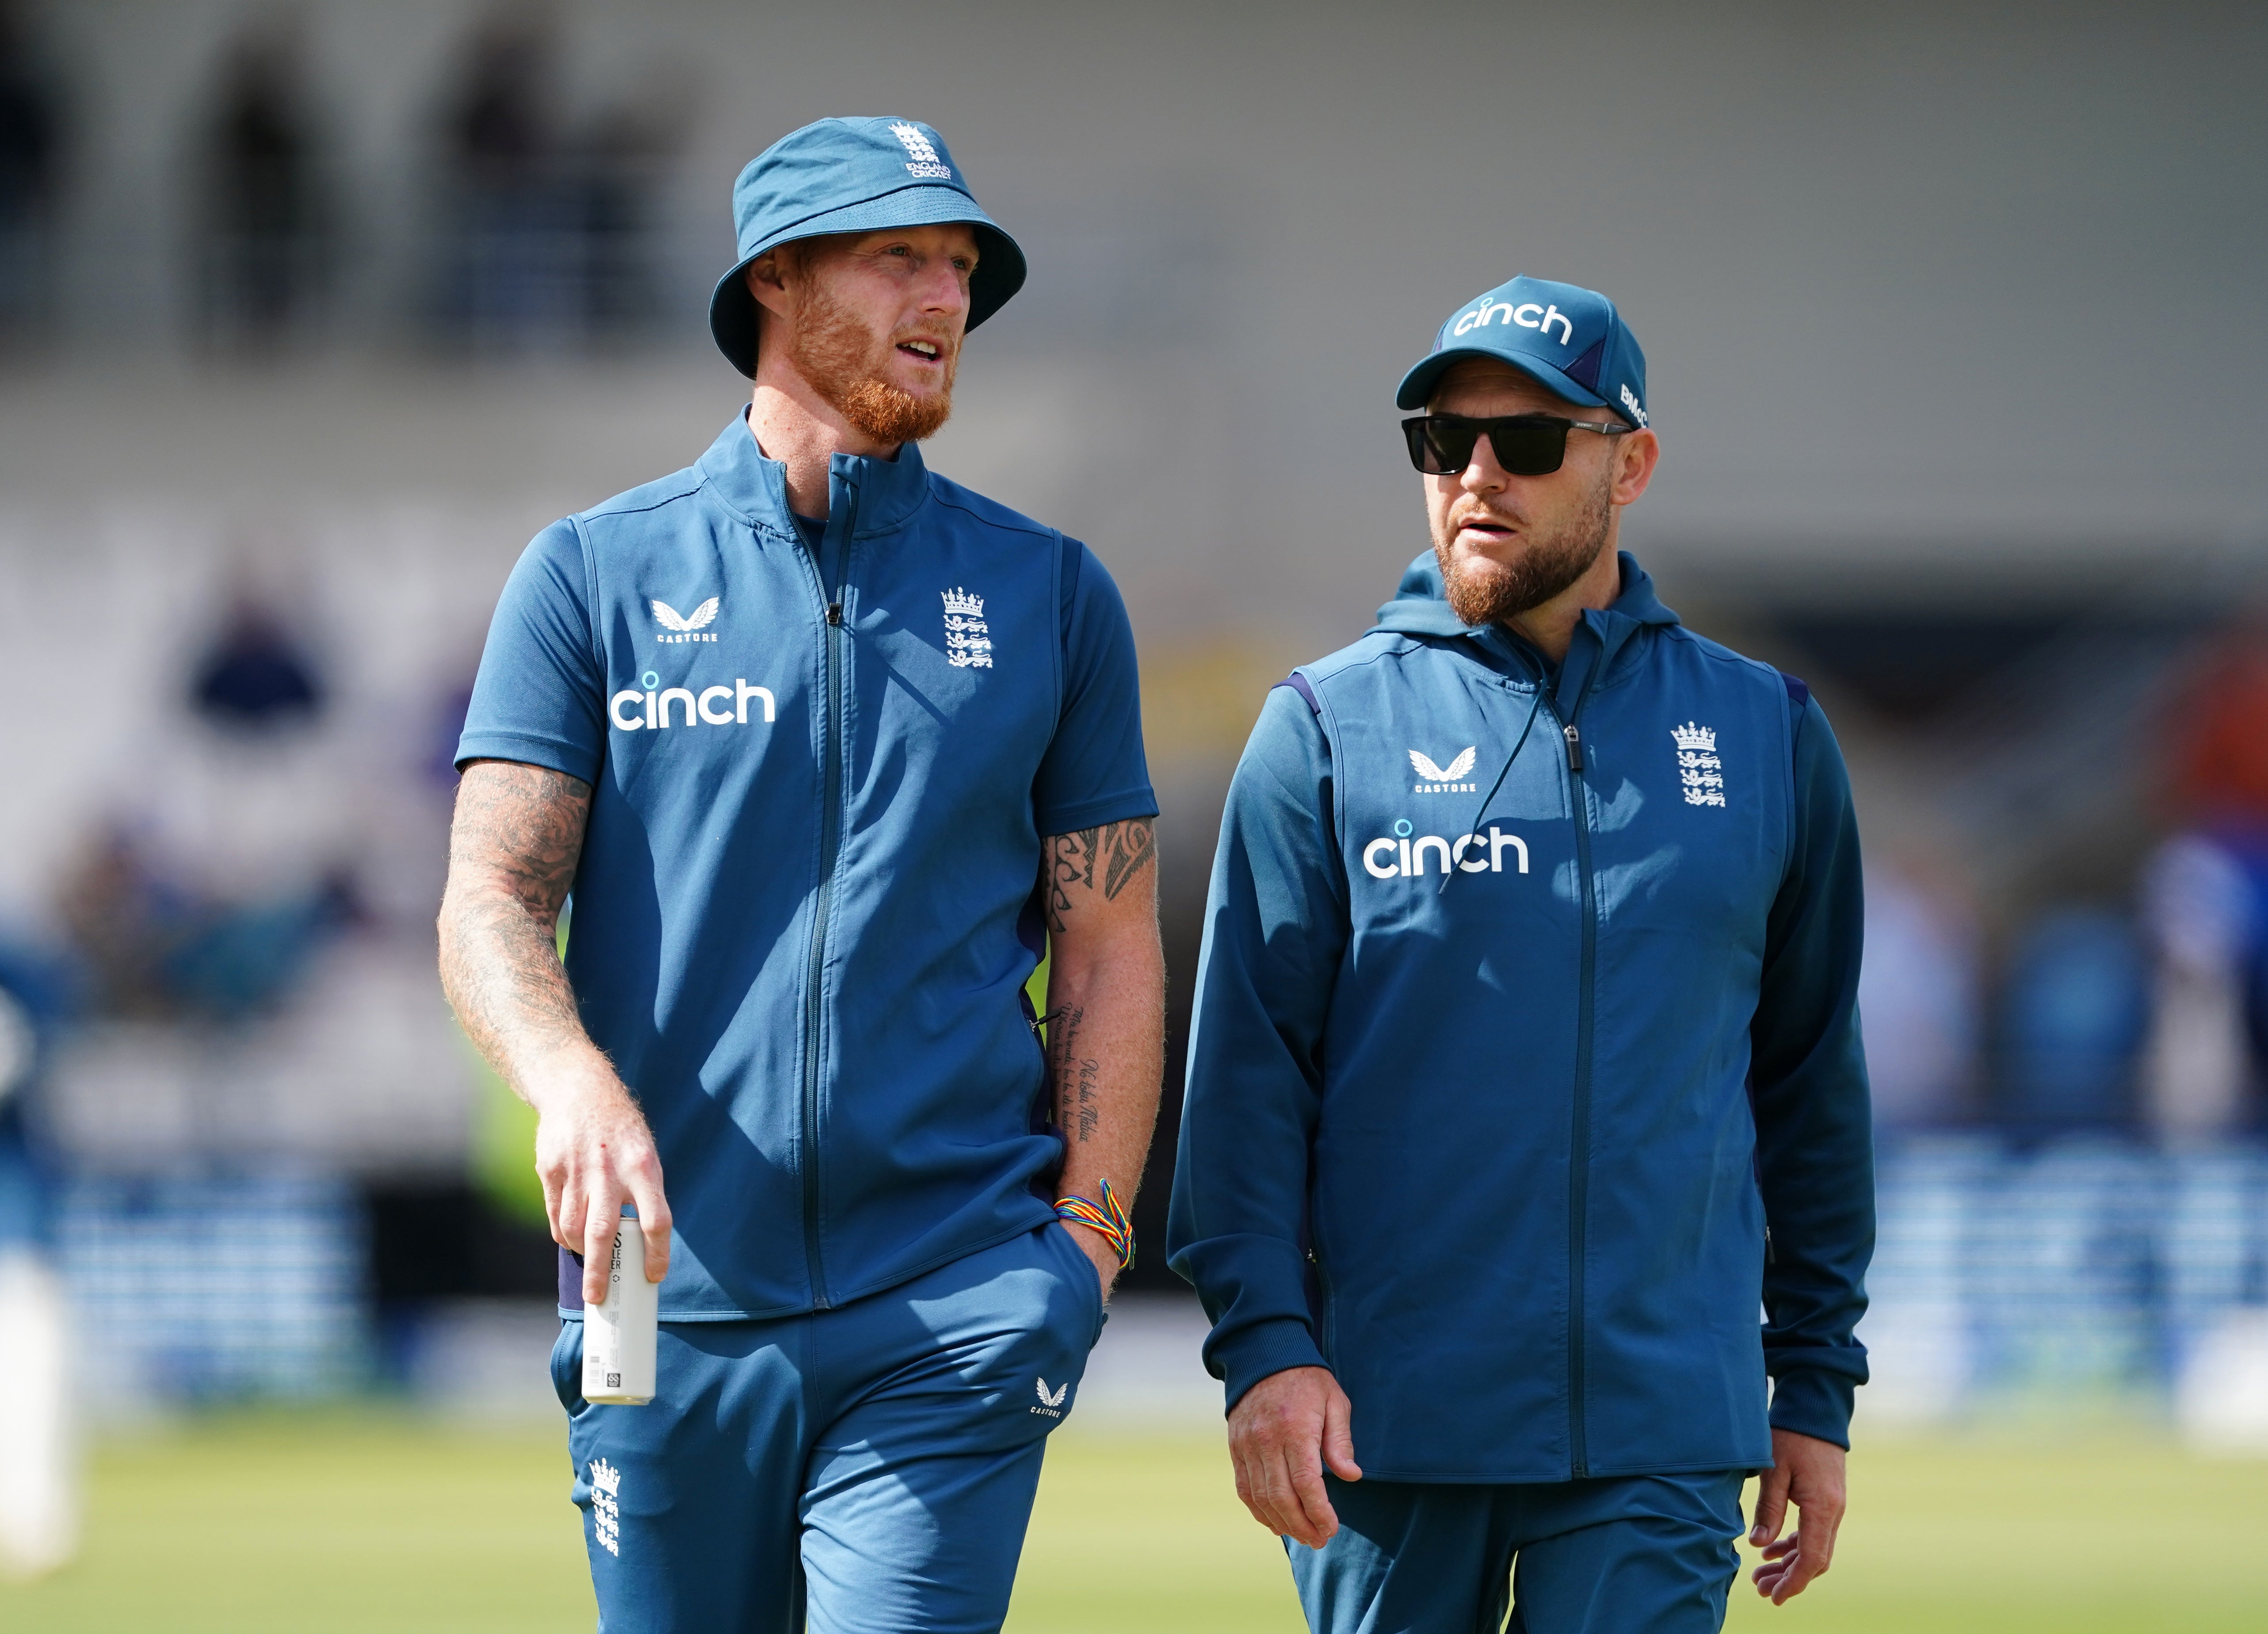 pa ready, england, shoaib bashir, brendon mccullum, ollie robinson, west indies, james anderson, ben stokes, jonny bairstow, matthew potts, ben foakes, india, jack leach, ashes, somerset, stuart broad, ireland, durham, england shake up test squad with three uncapped players for west indies series